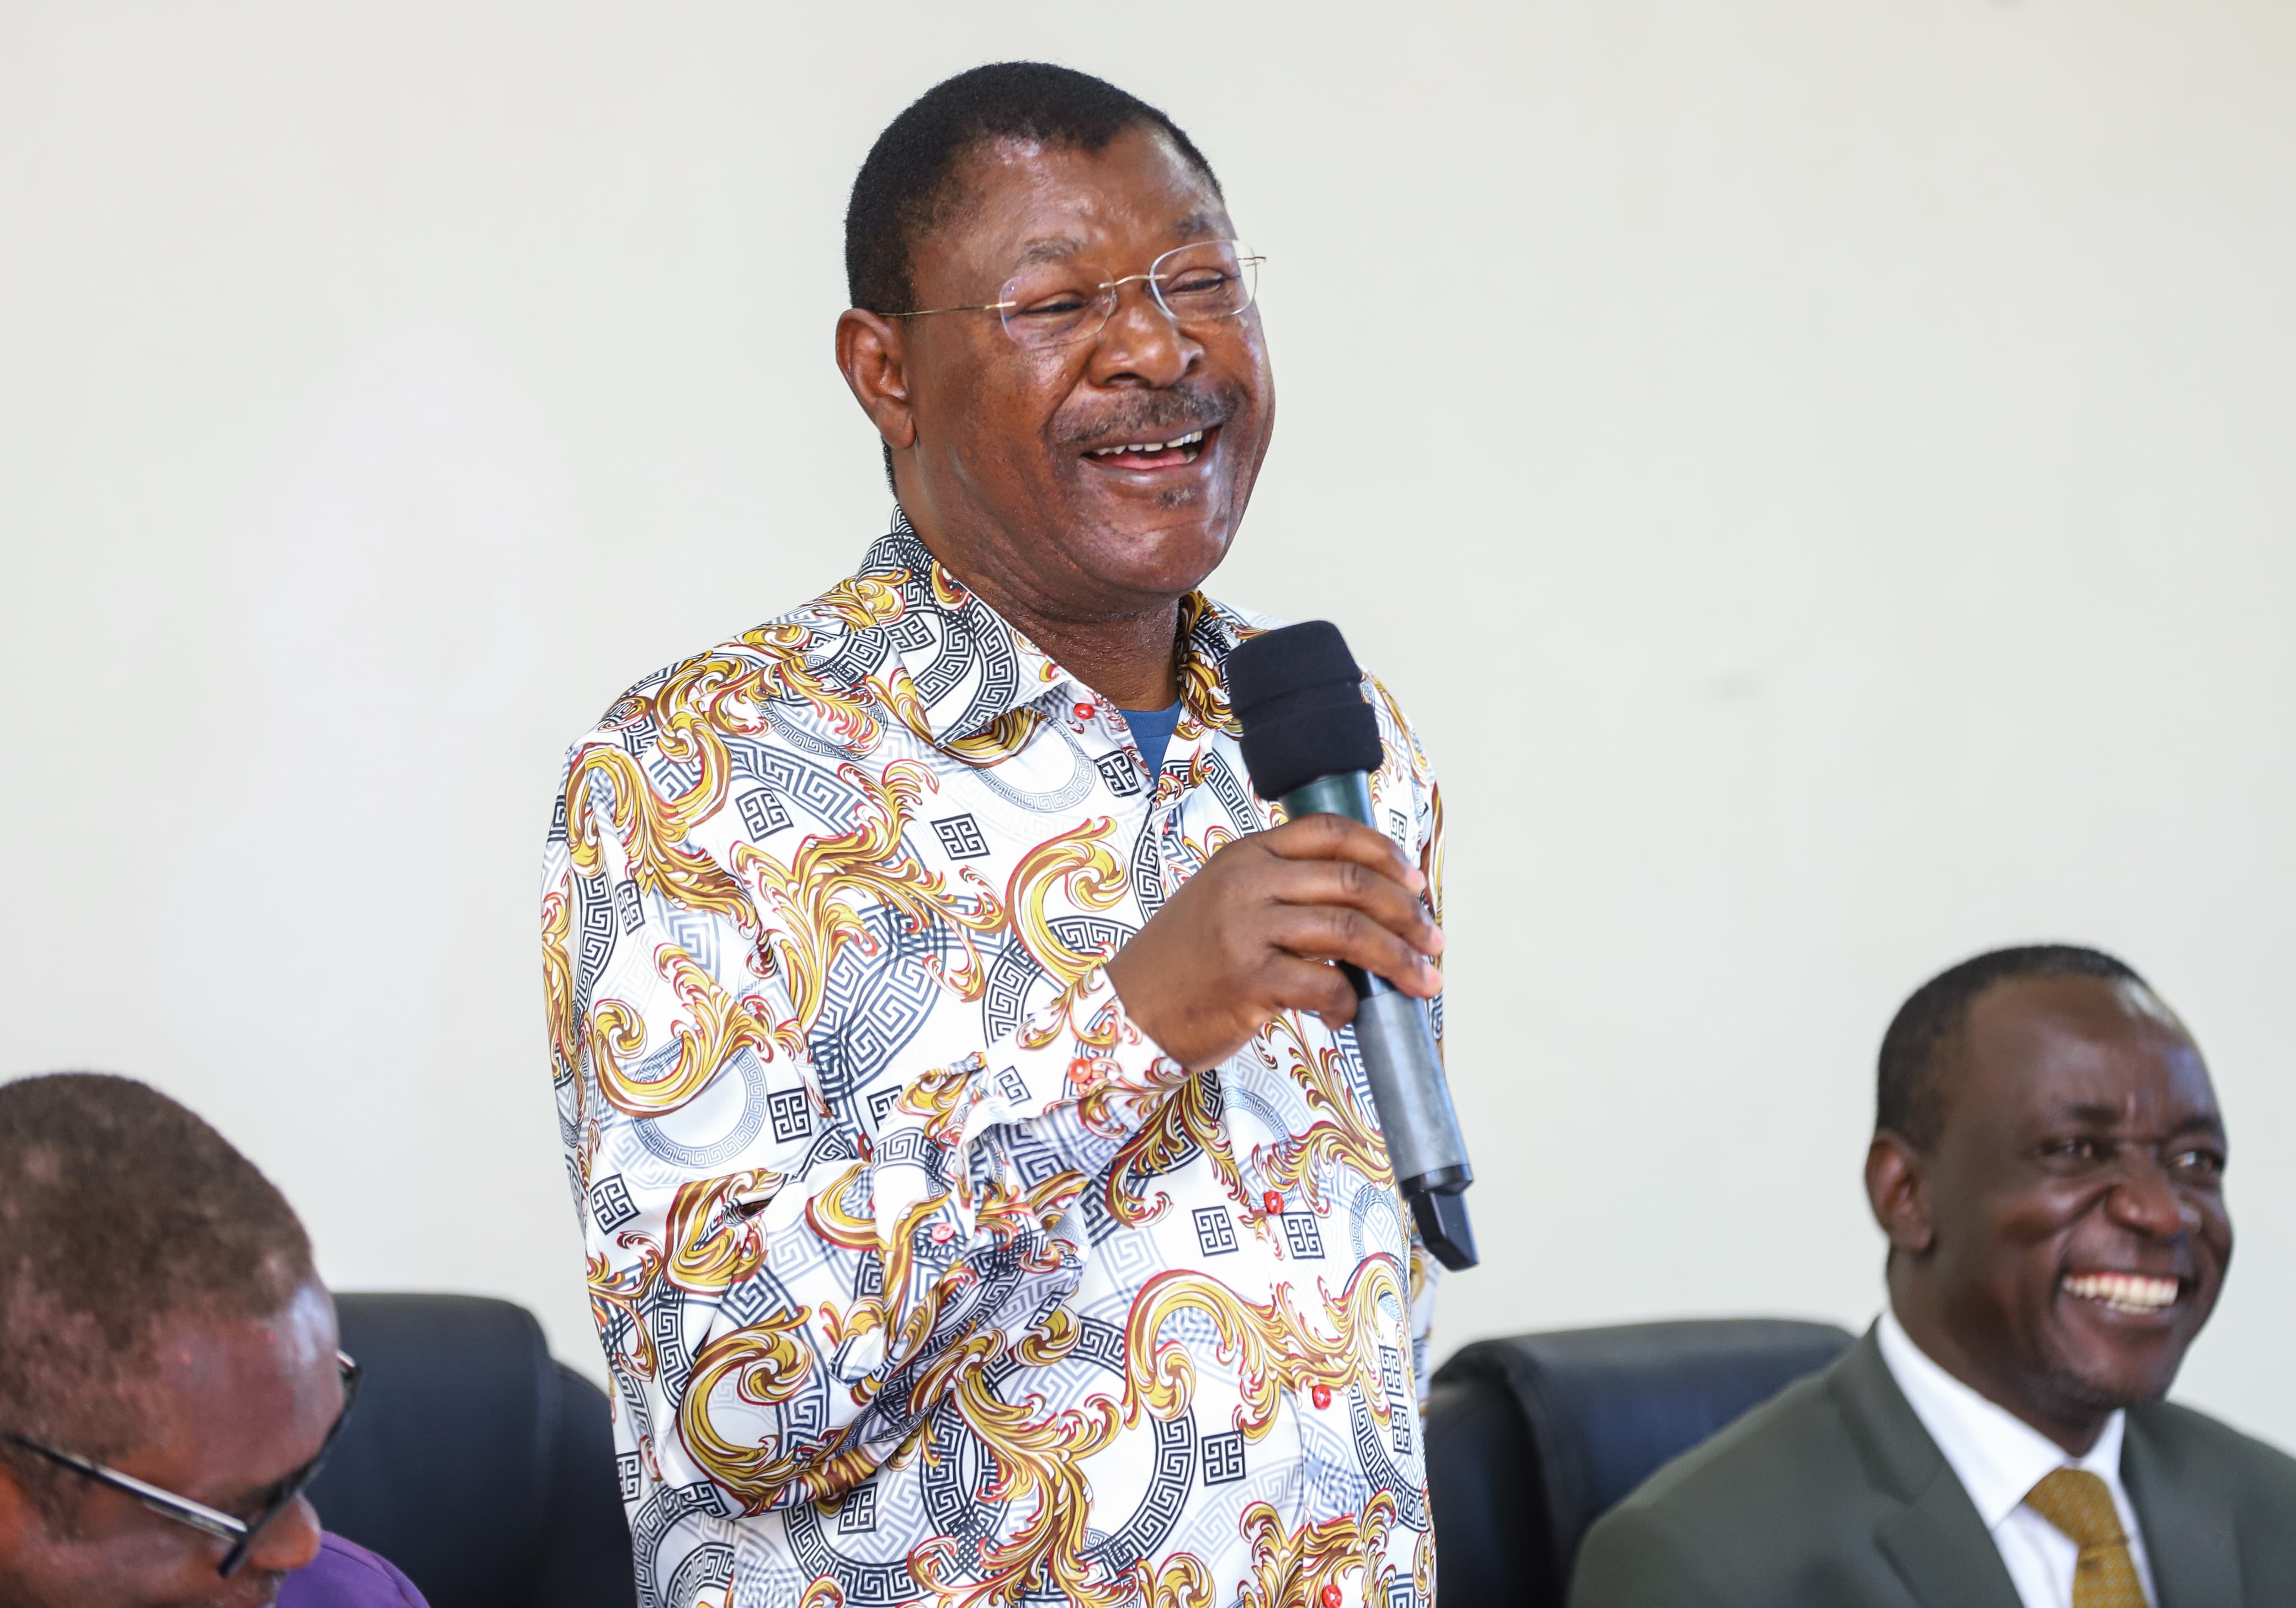 Hon. Moses Masika Wetangula address the people at the Laying of foundation stone for the construction of debating chambers